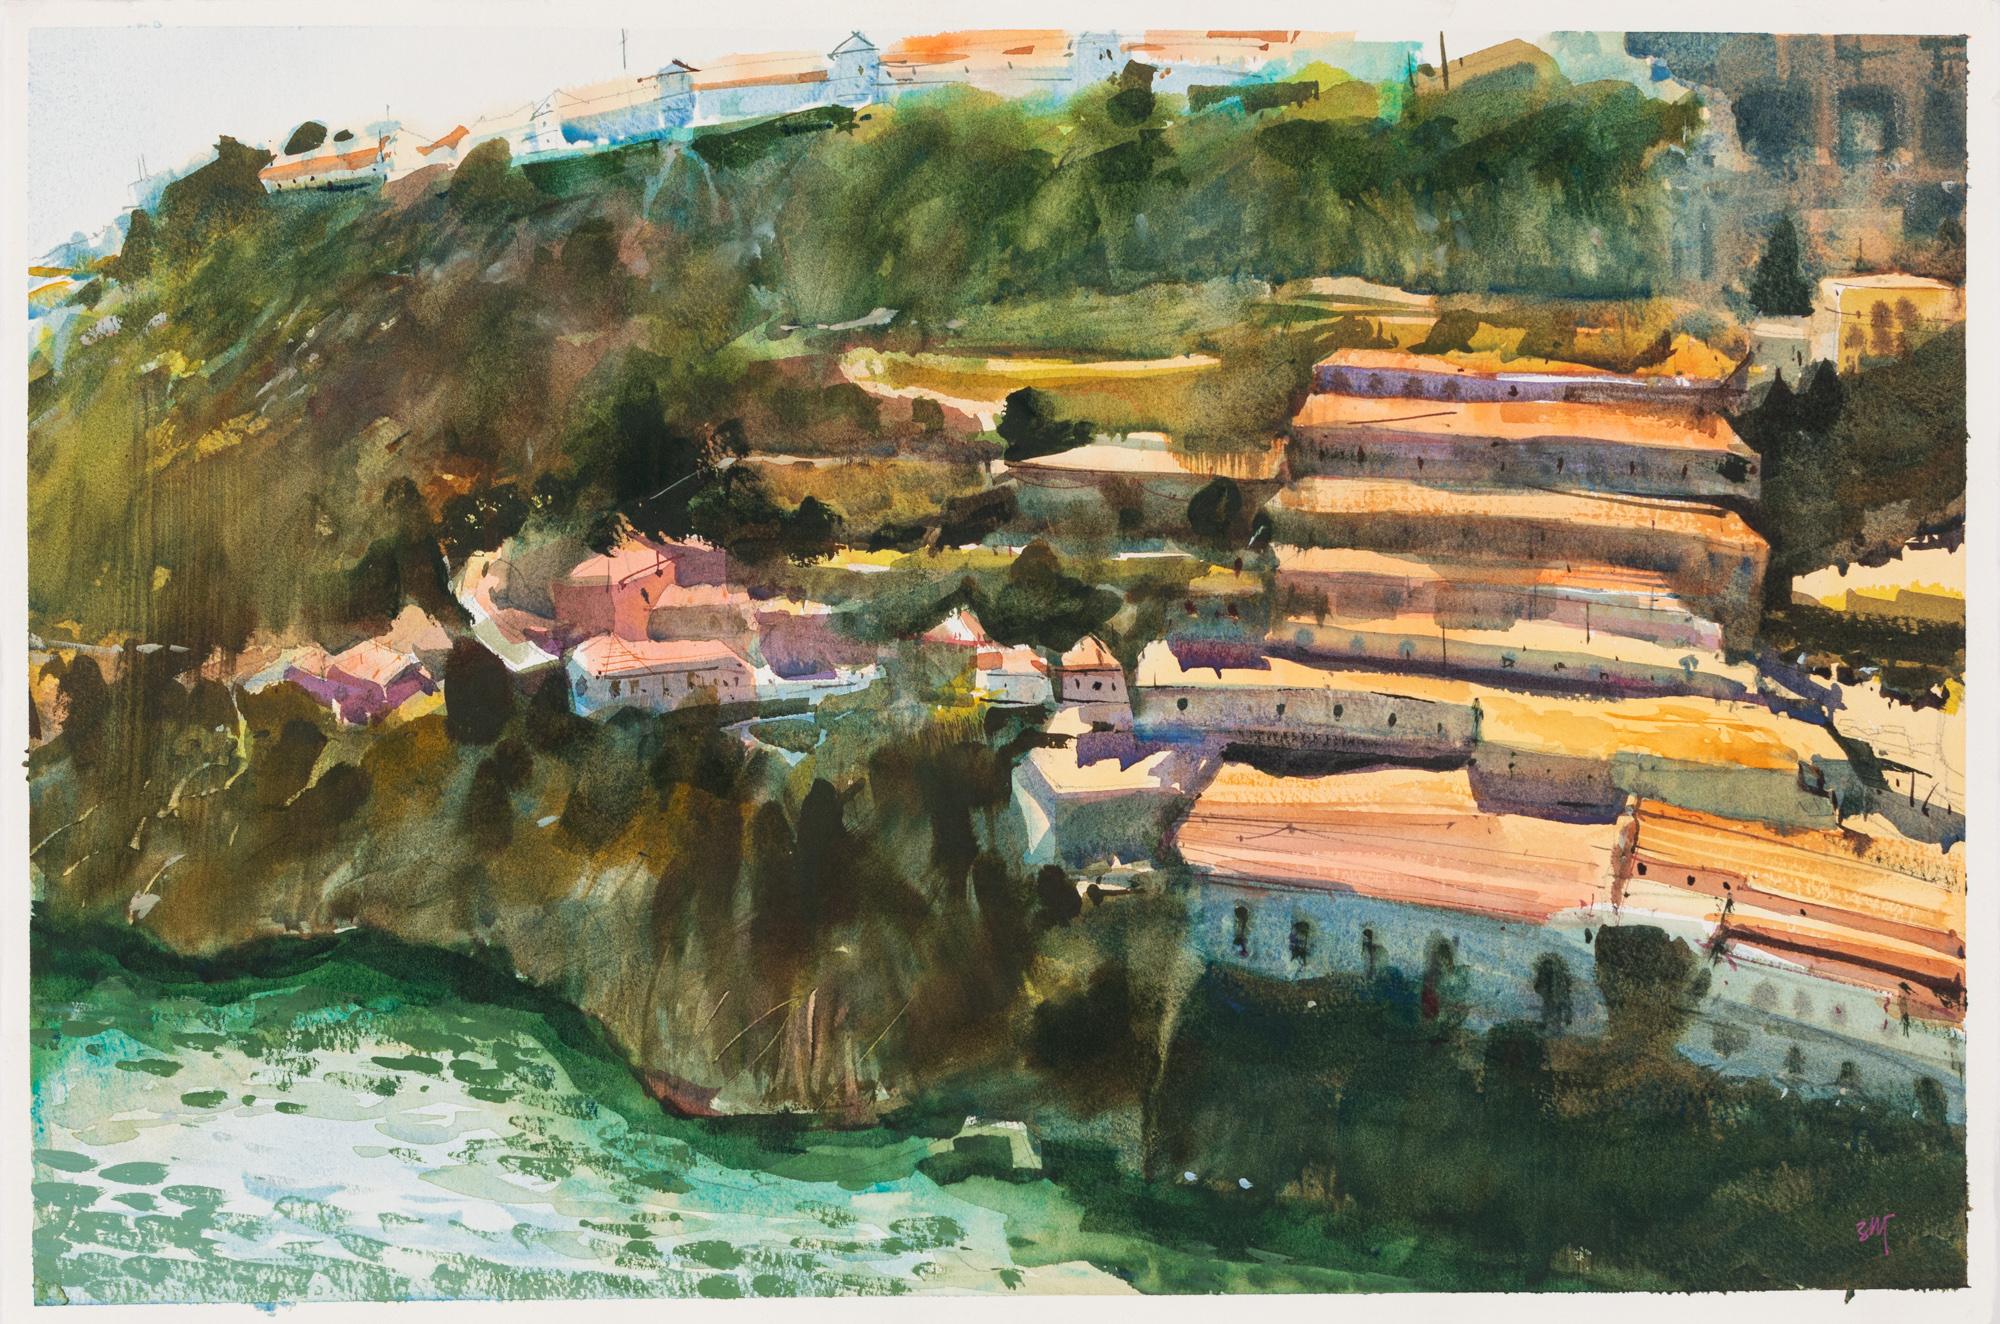 Uma Kelkar Landscape Painting - "Sunny Porto" A Watercolor Painting of Cliff Side Homes in Portugal